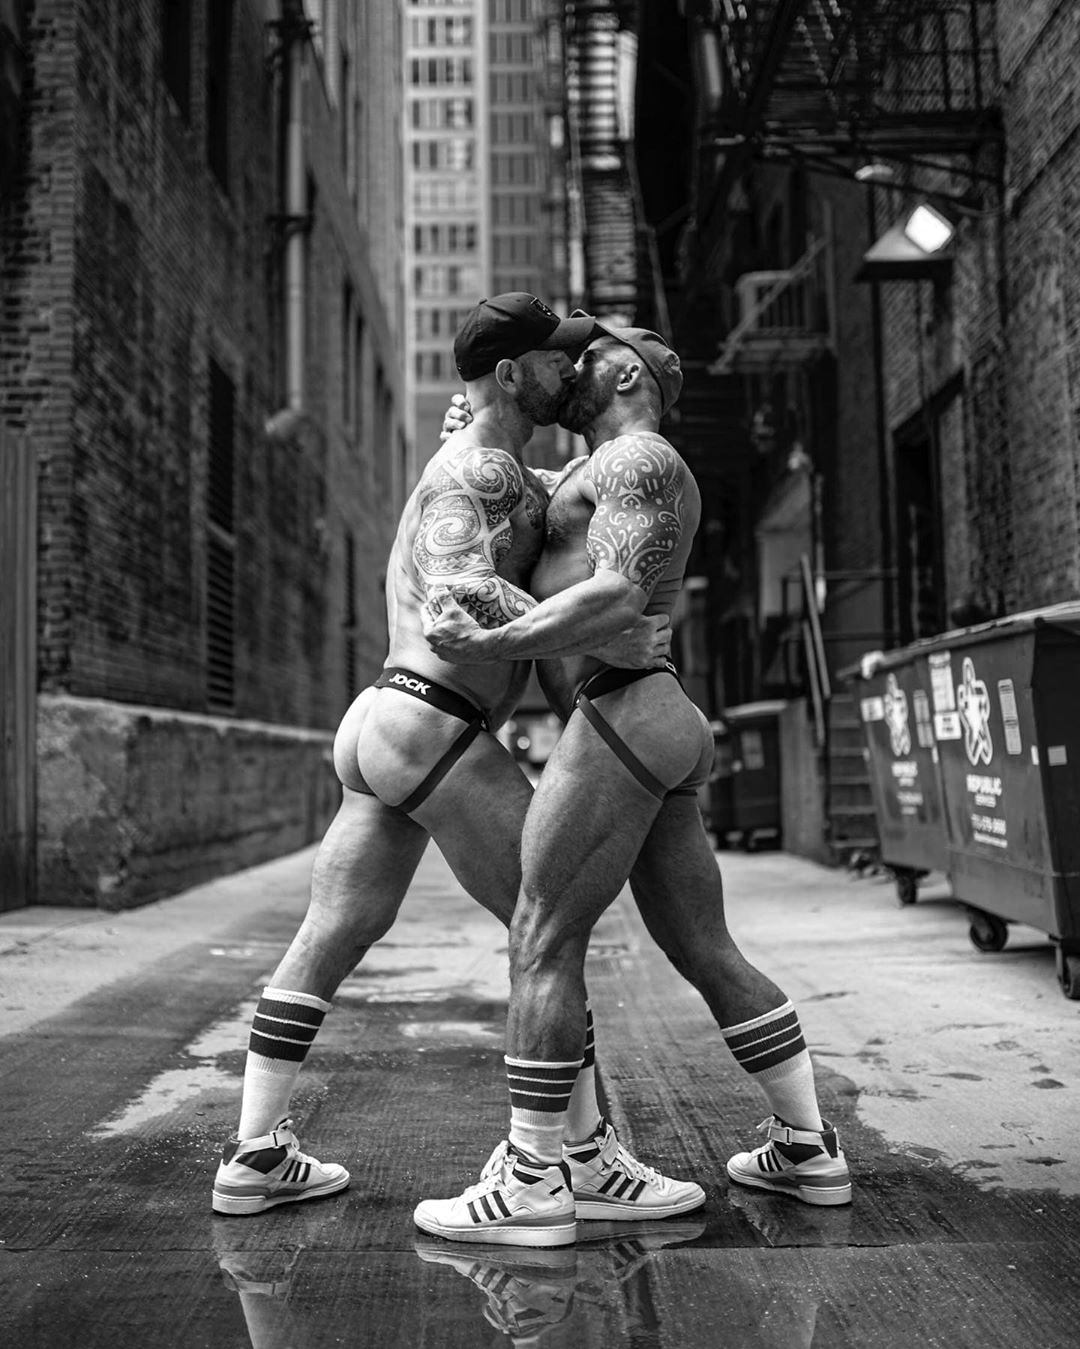 JockS, SockS, hi-TopS by Chadford for Schuld Photography ft Vic Rocco and Jon Galt (NSFW).